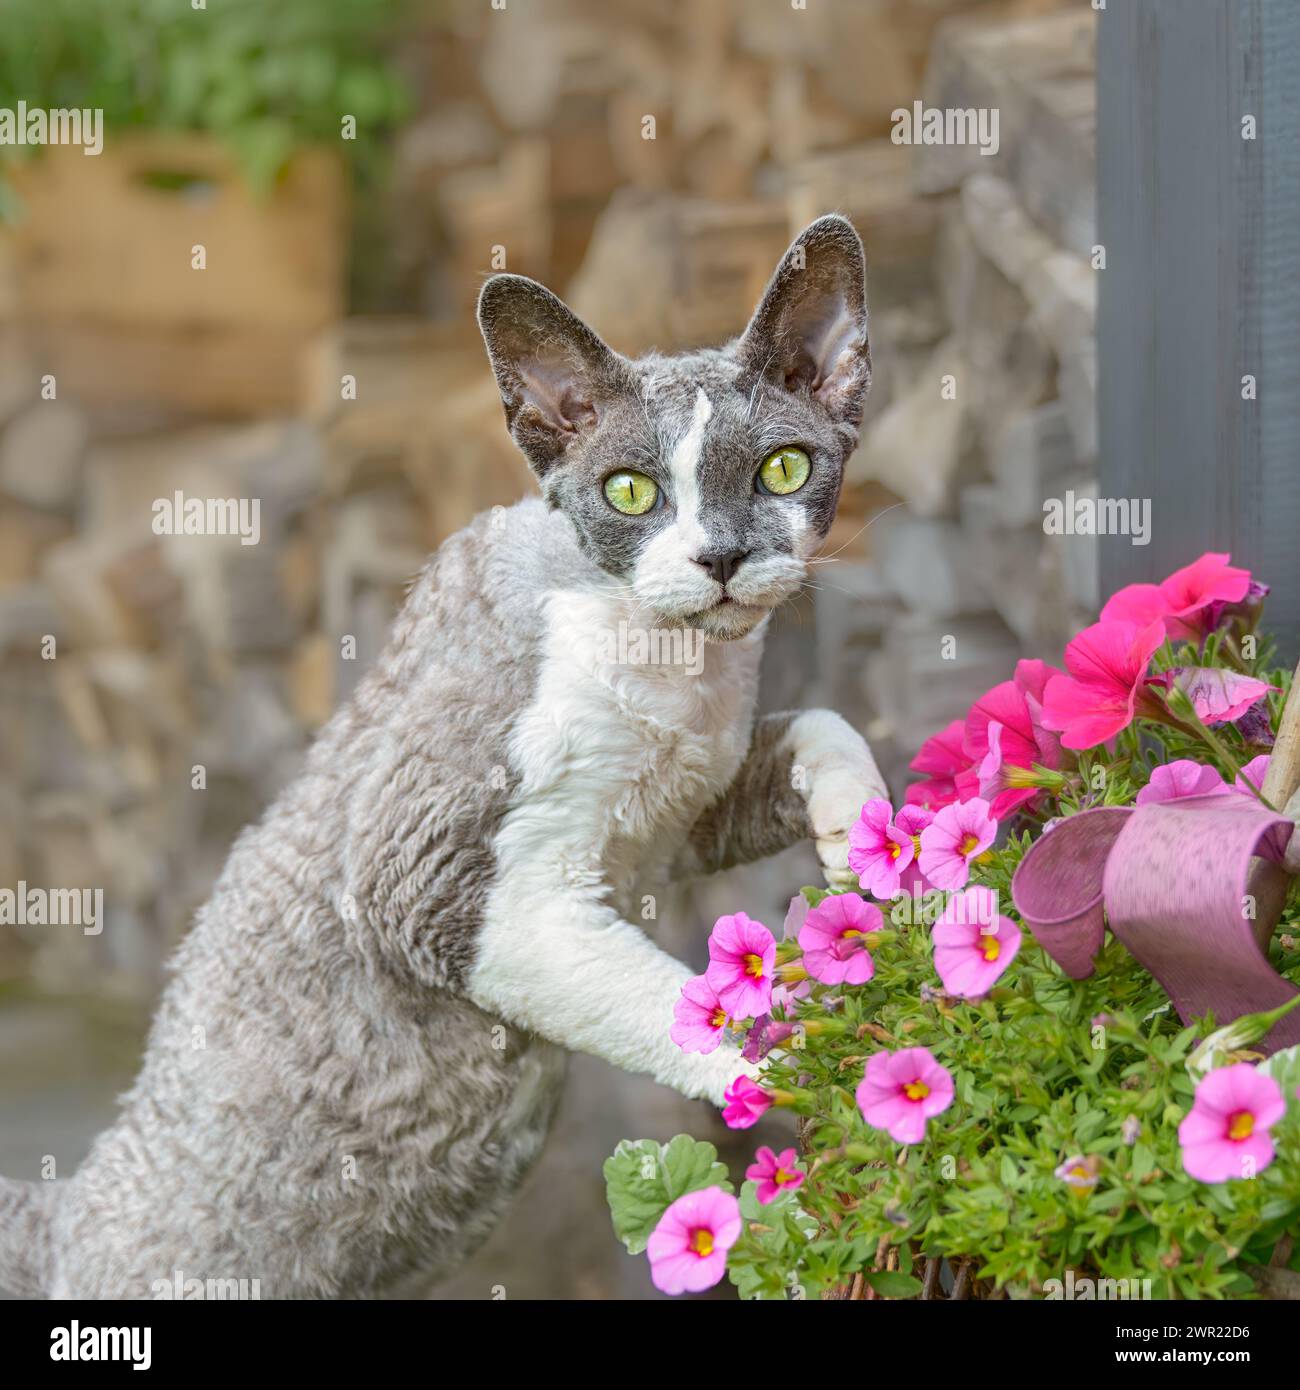 Devon Rex bicolor cat playing with pink flowers outside in a garden, looking curiously with wonderful colored eyes, Germany Stock Photo